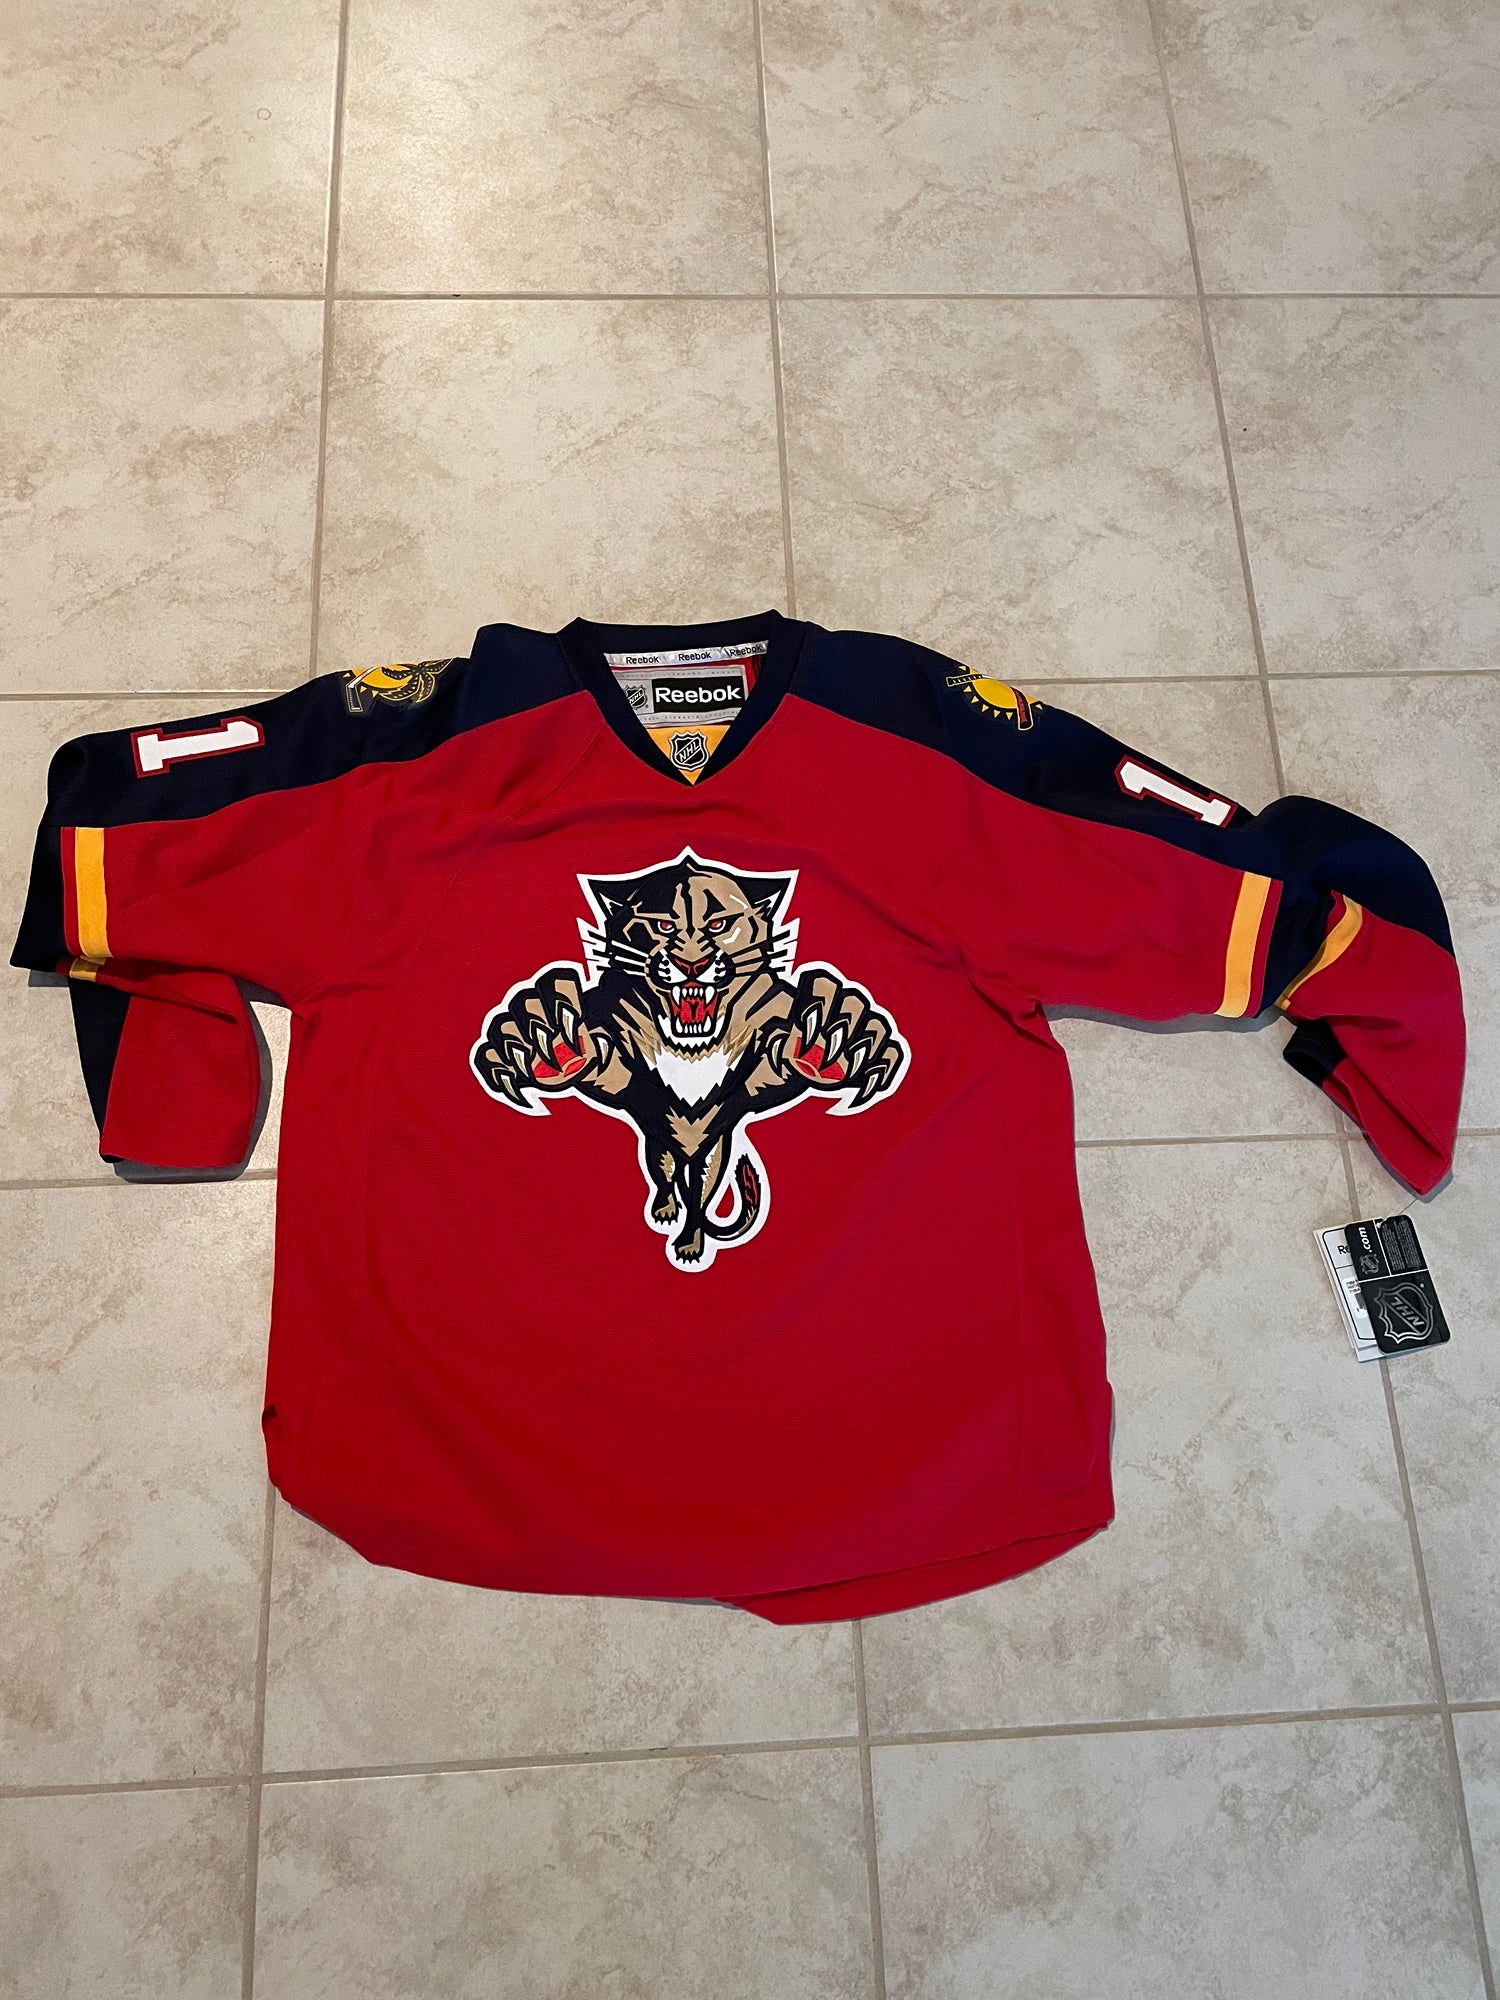 WOMENS Florida Panthers Authentic RBK NHL Hockey Jersey